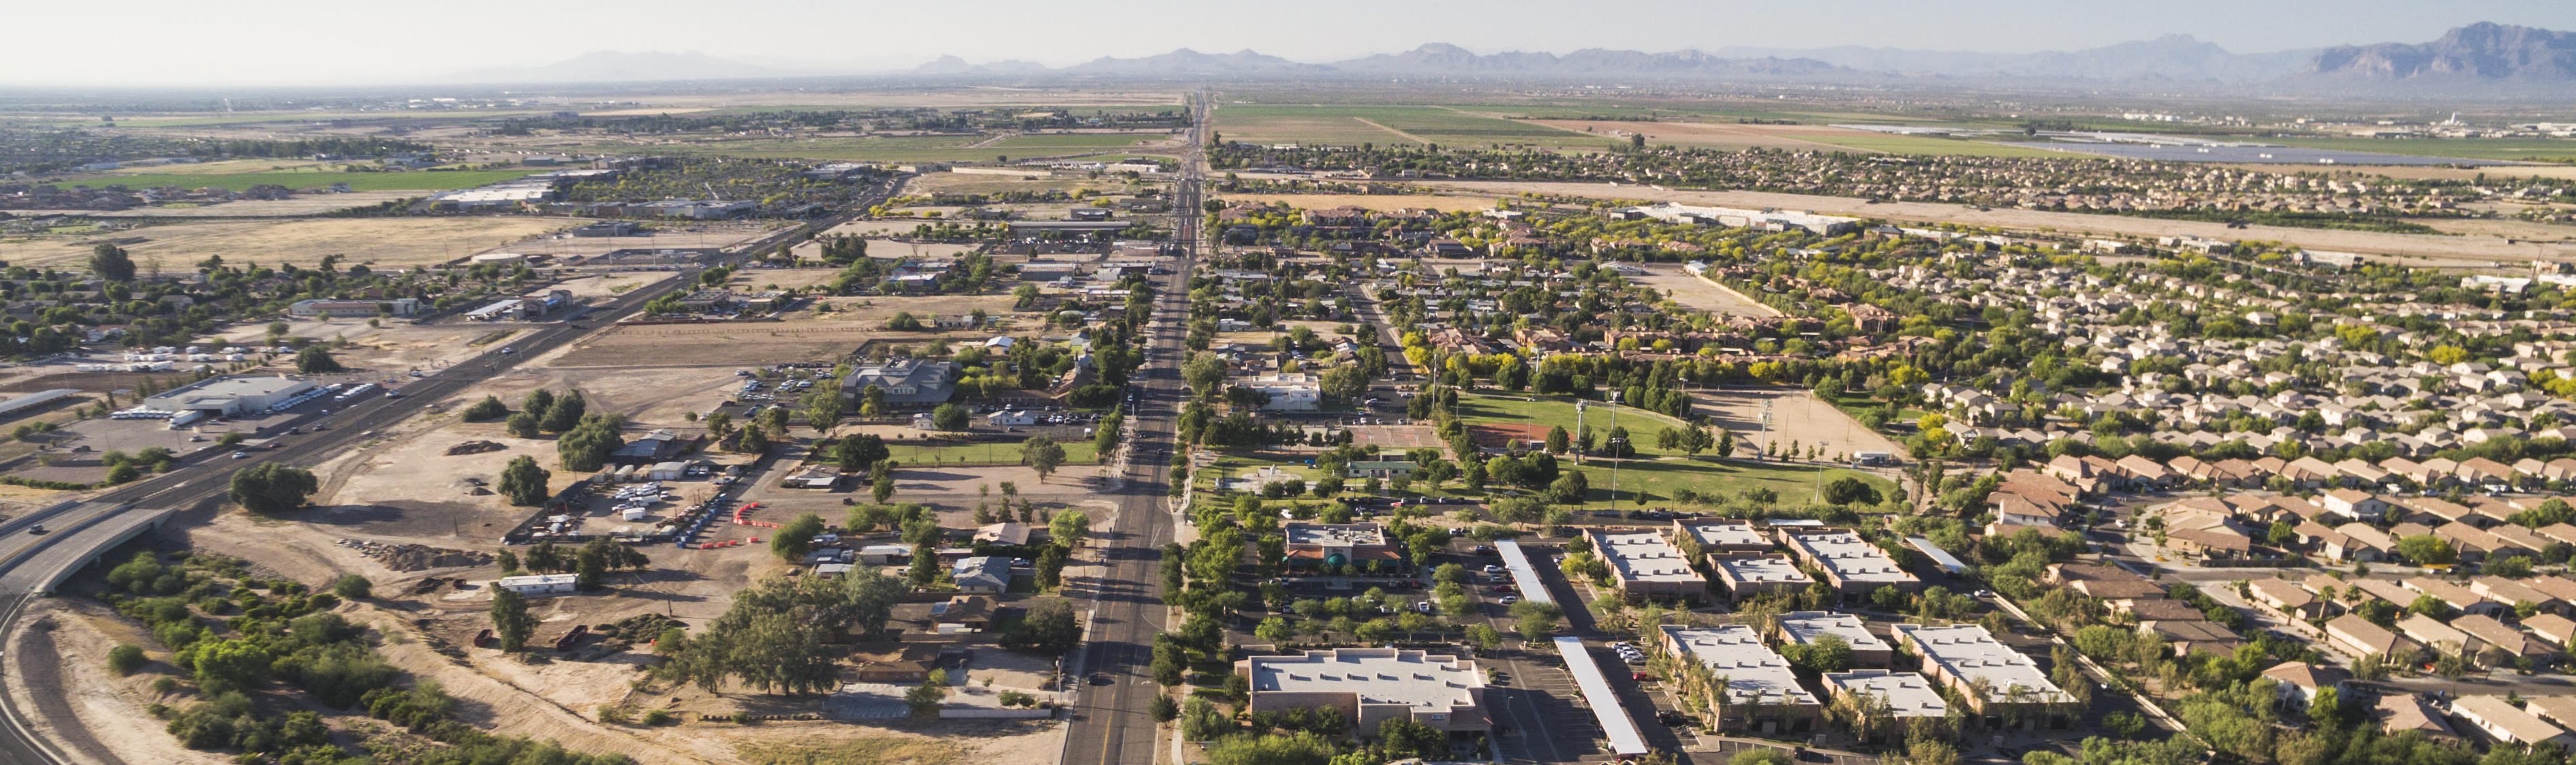 Business Climate in PHX East Valley Region Heats Up